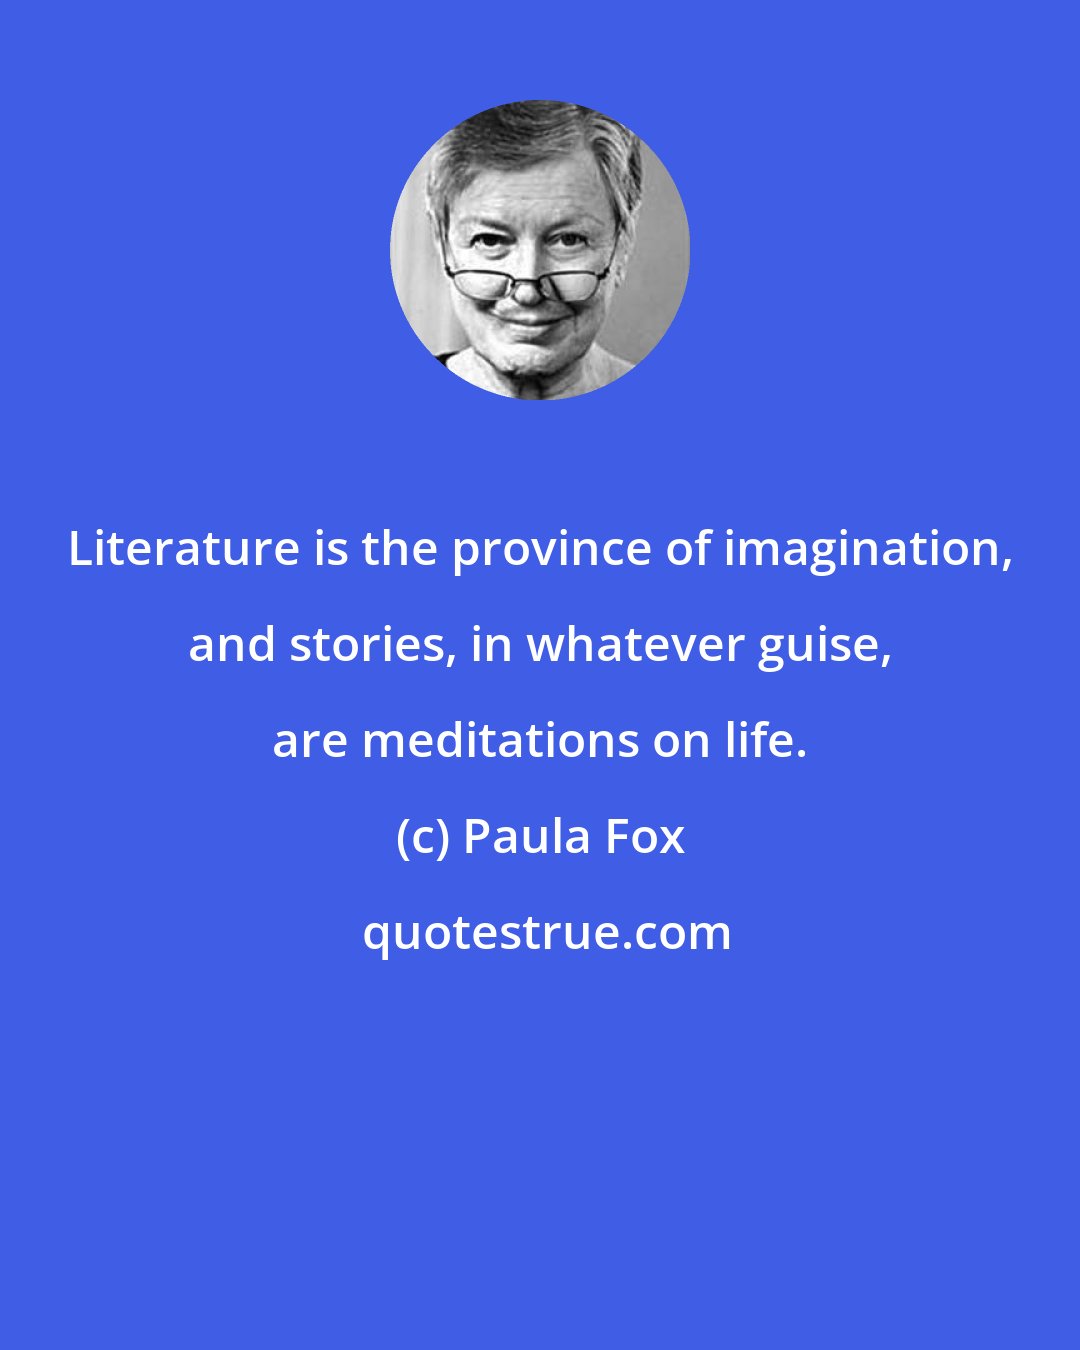 Paula Fox: Literature is the province of imagination, and stories, in whatever guise, are meditations on life.